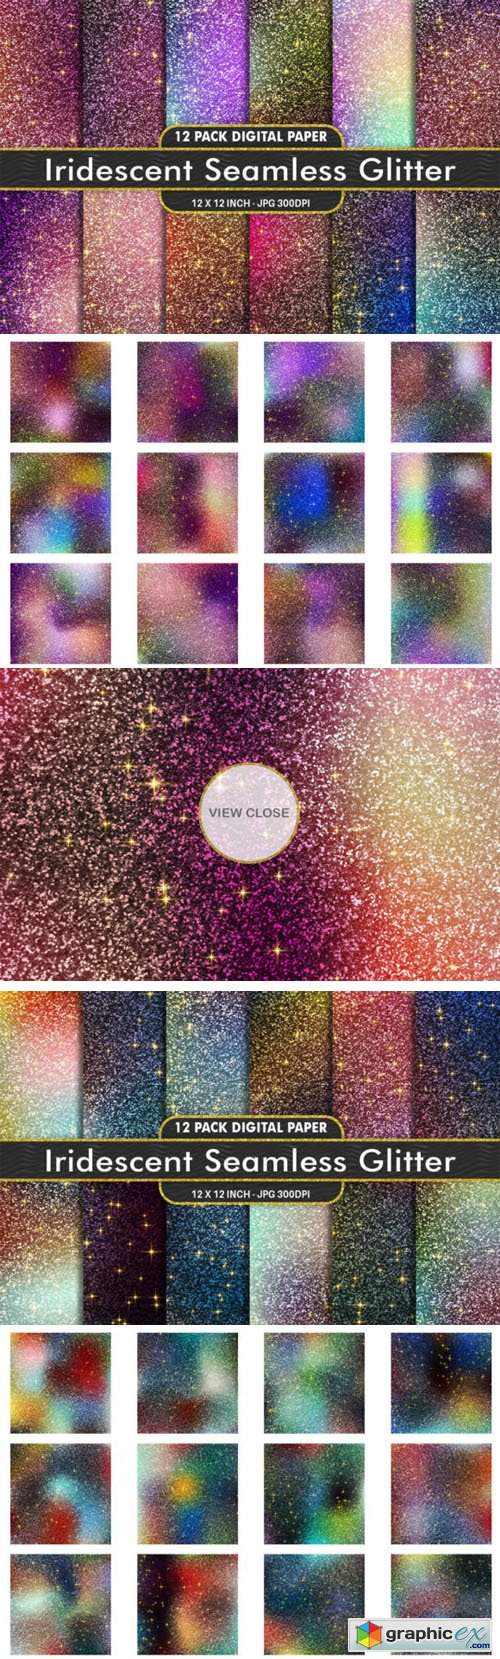  60 Awesome Glitter Textures Collection 